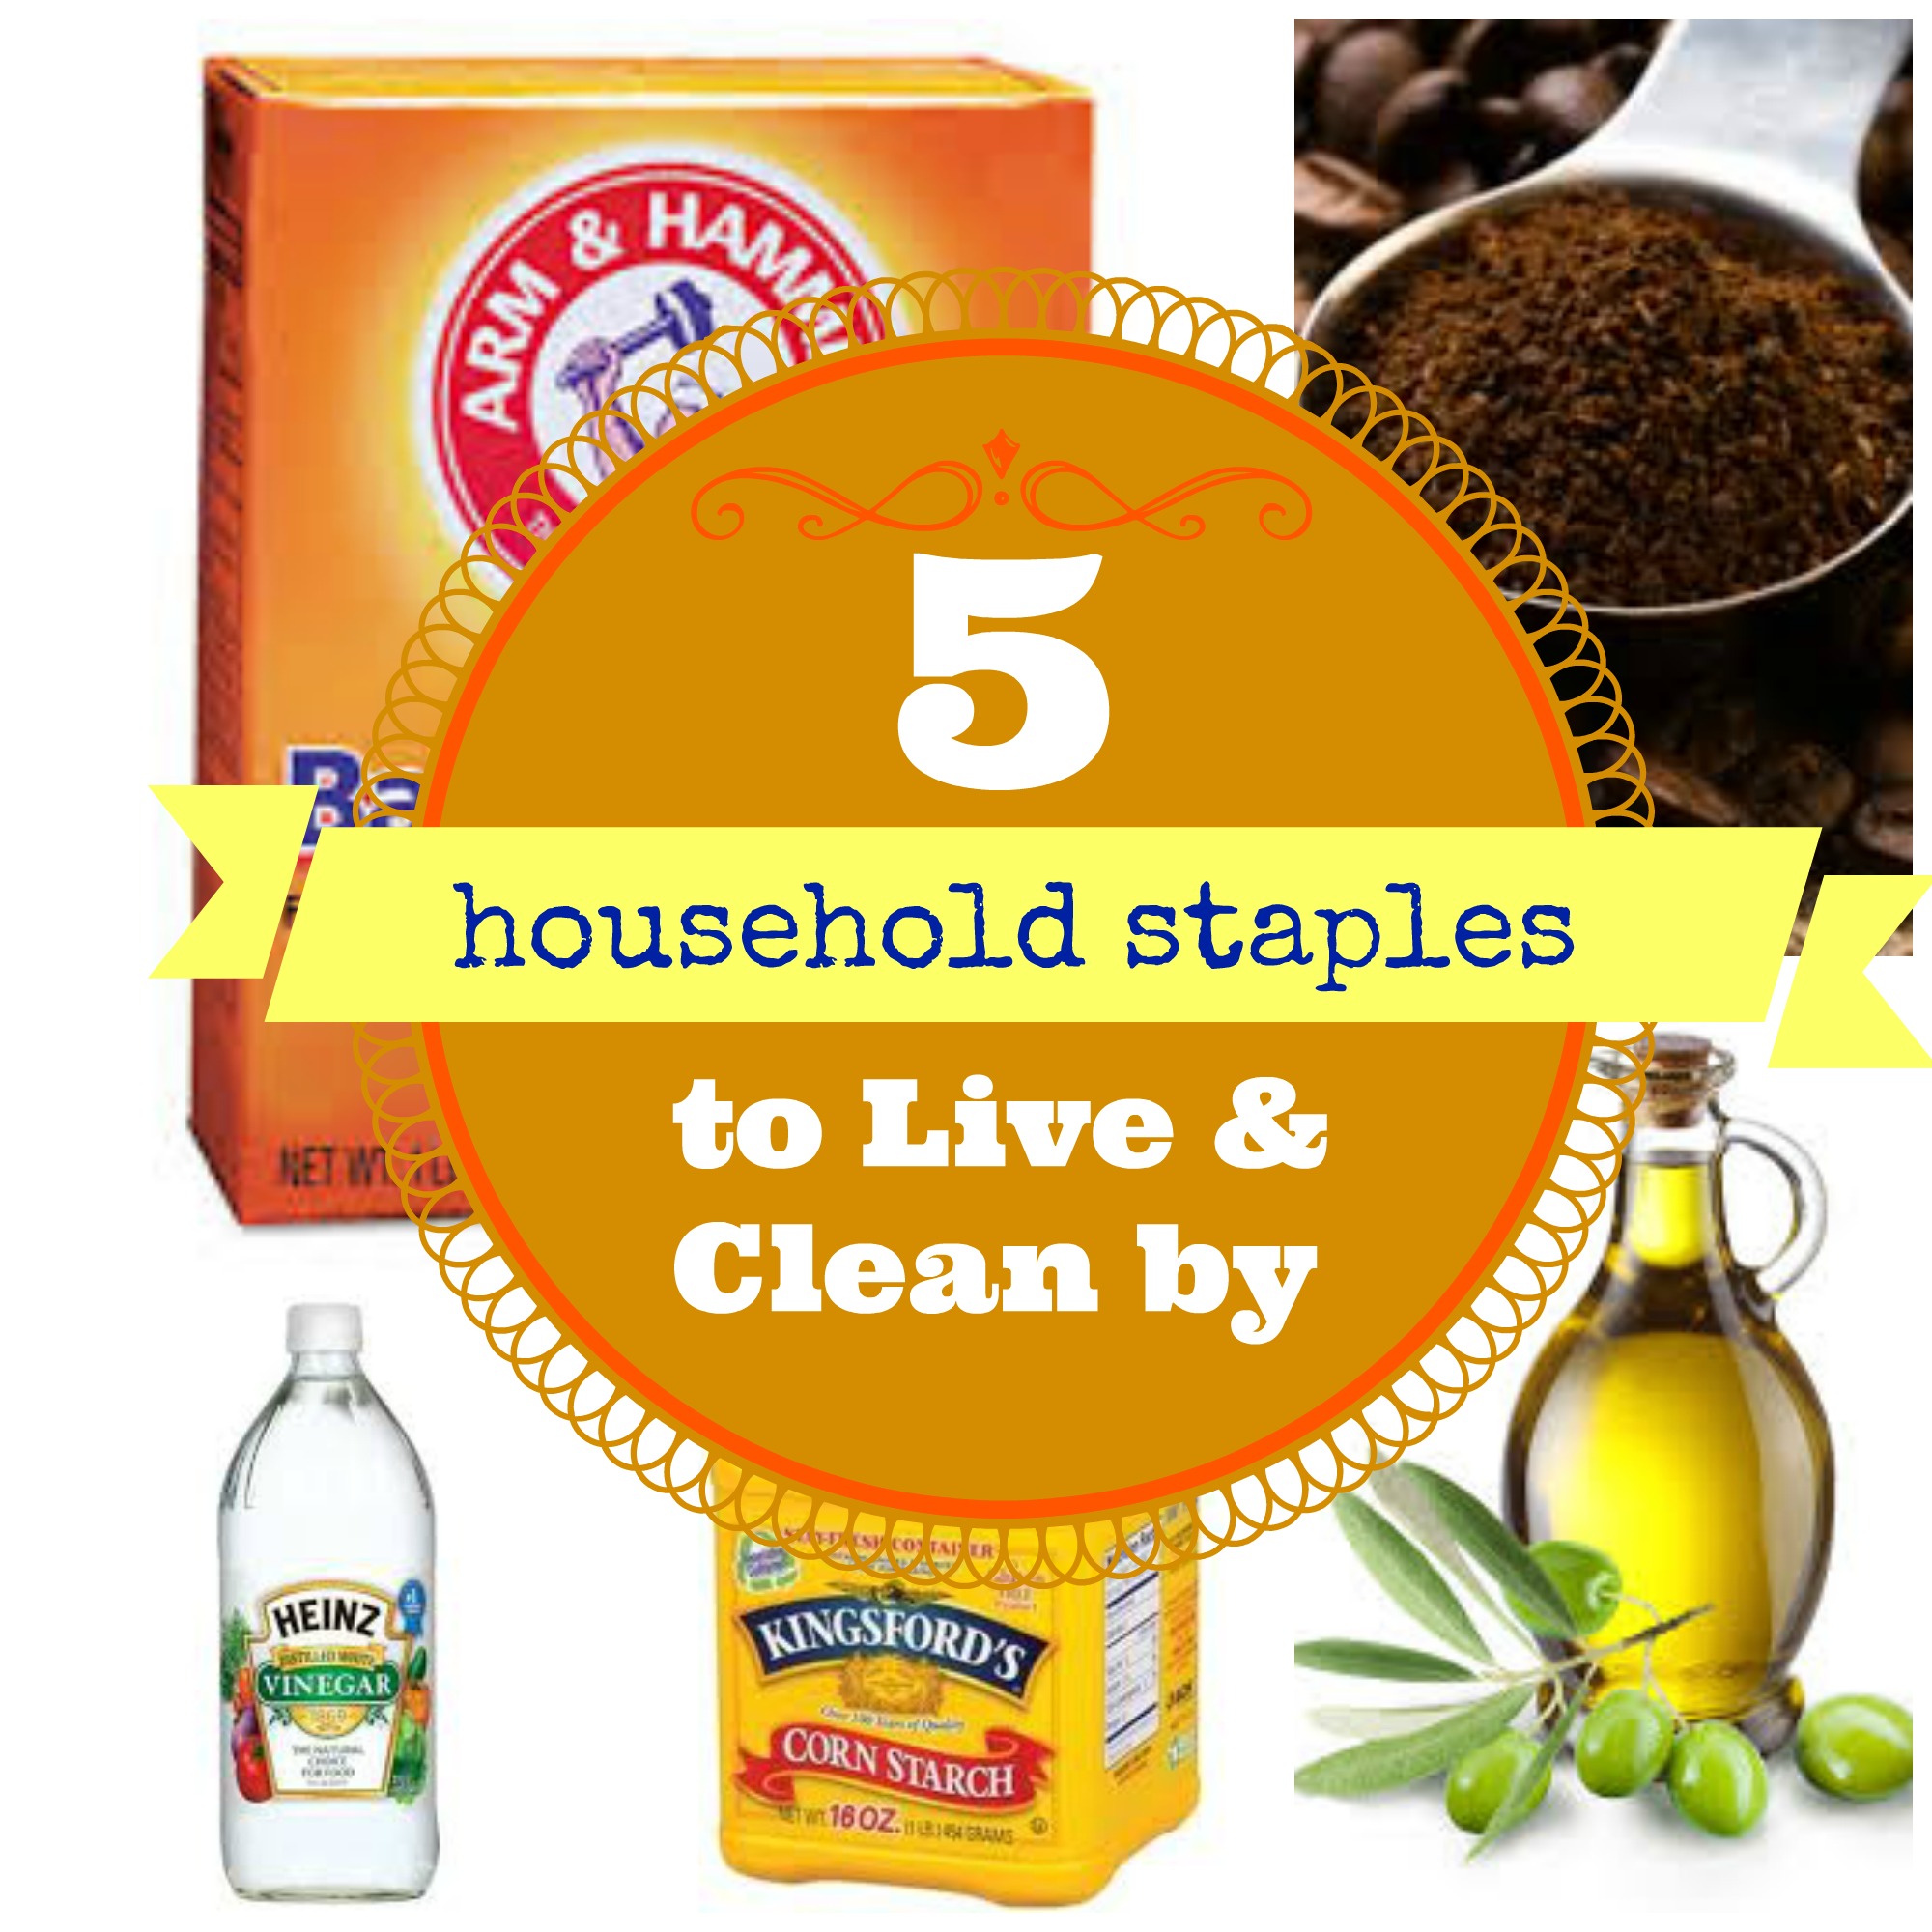 5 Household staples to live and clean by!